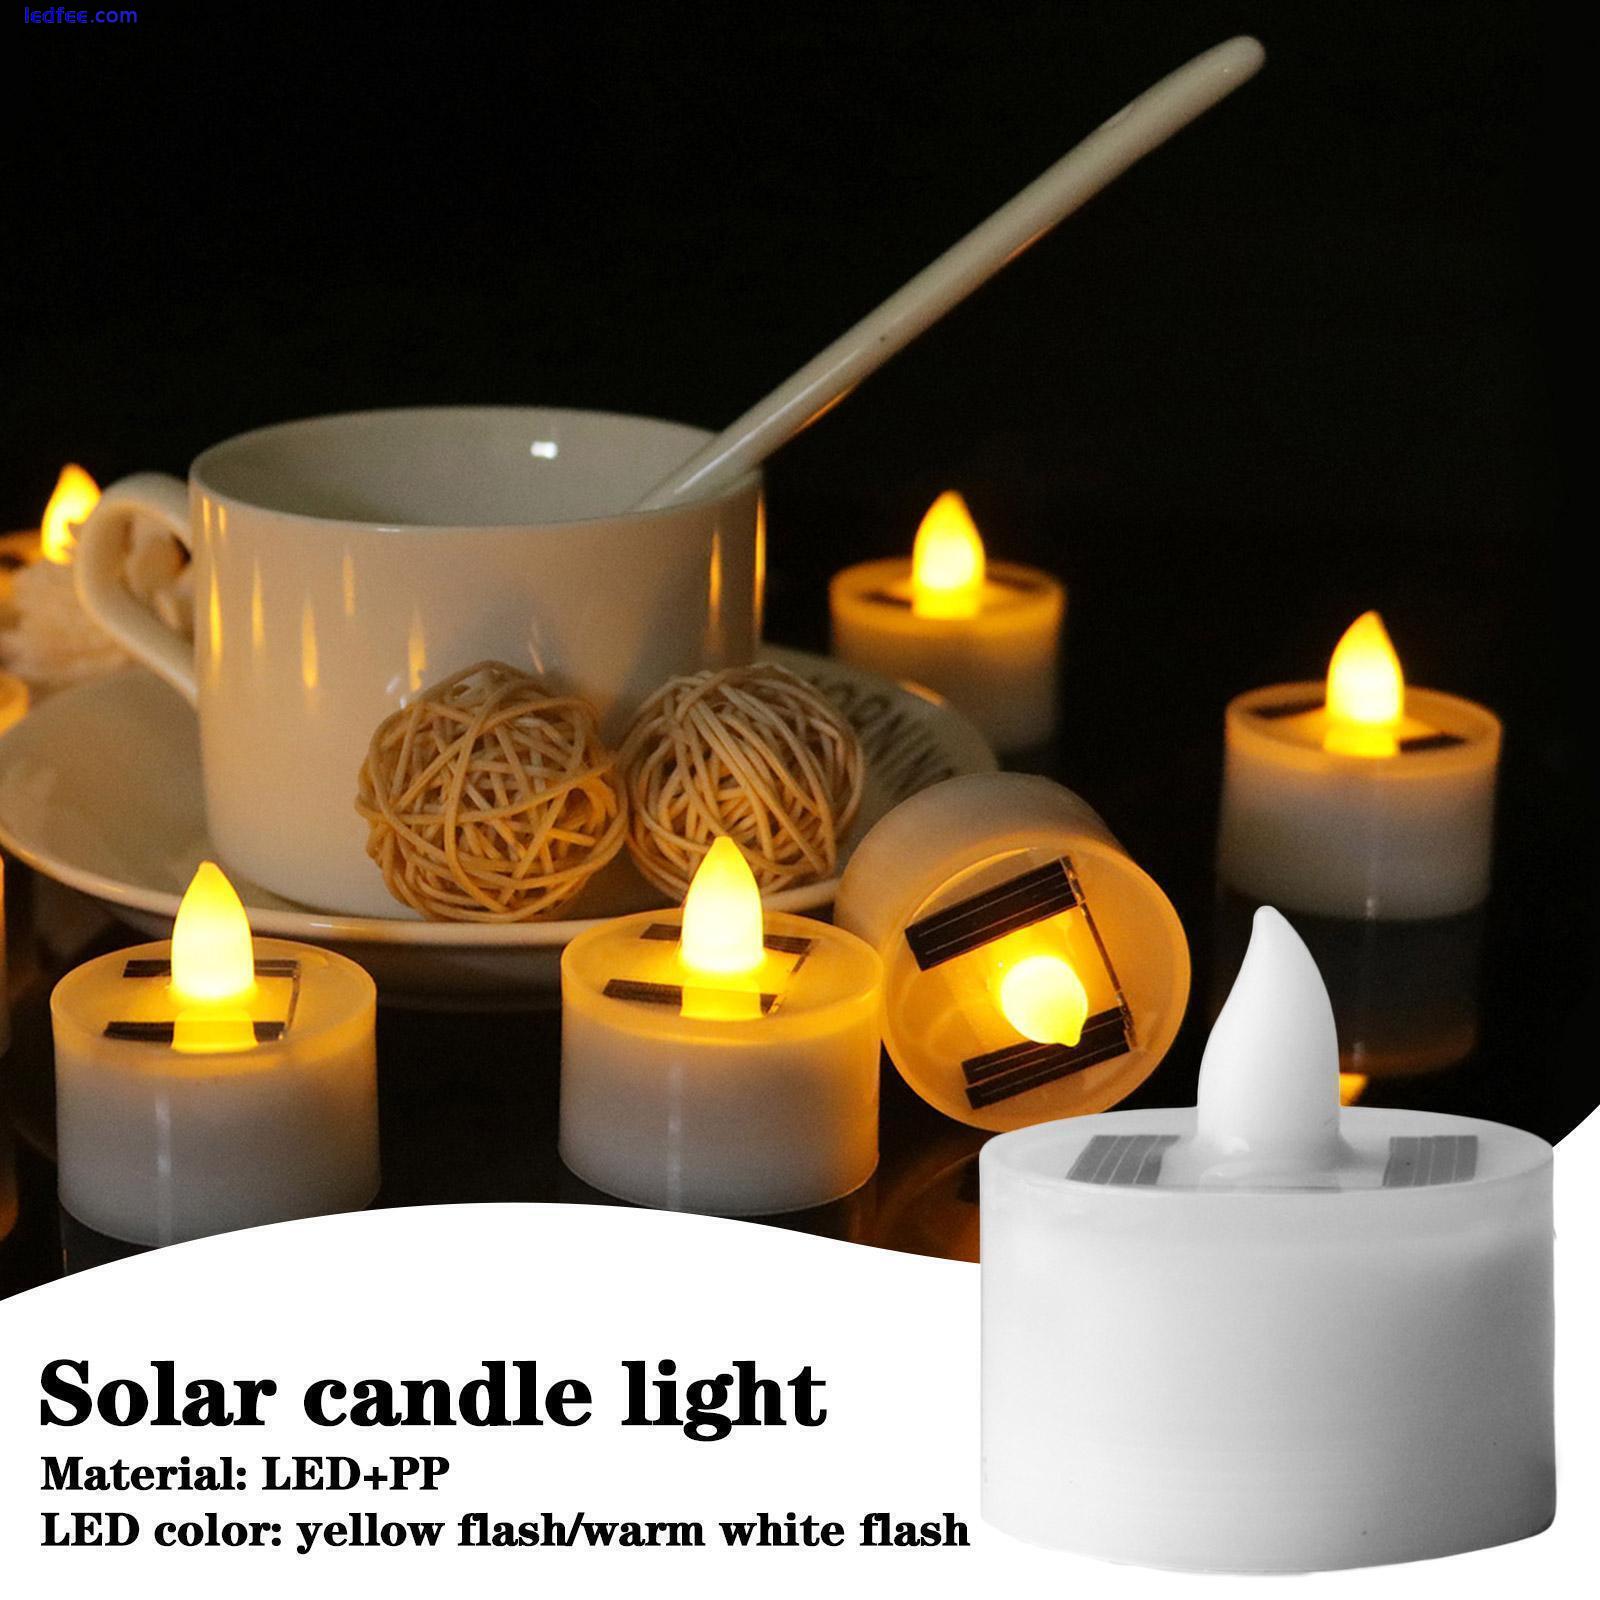 Solar LED Candle Light Smokeless Electronic Candle Birthday Halloween Party F1H2 0 